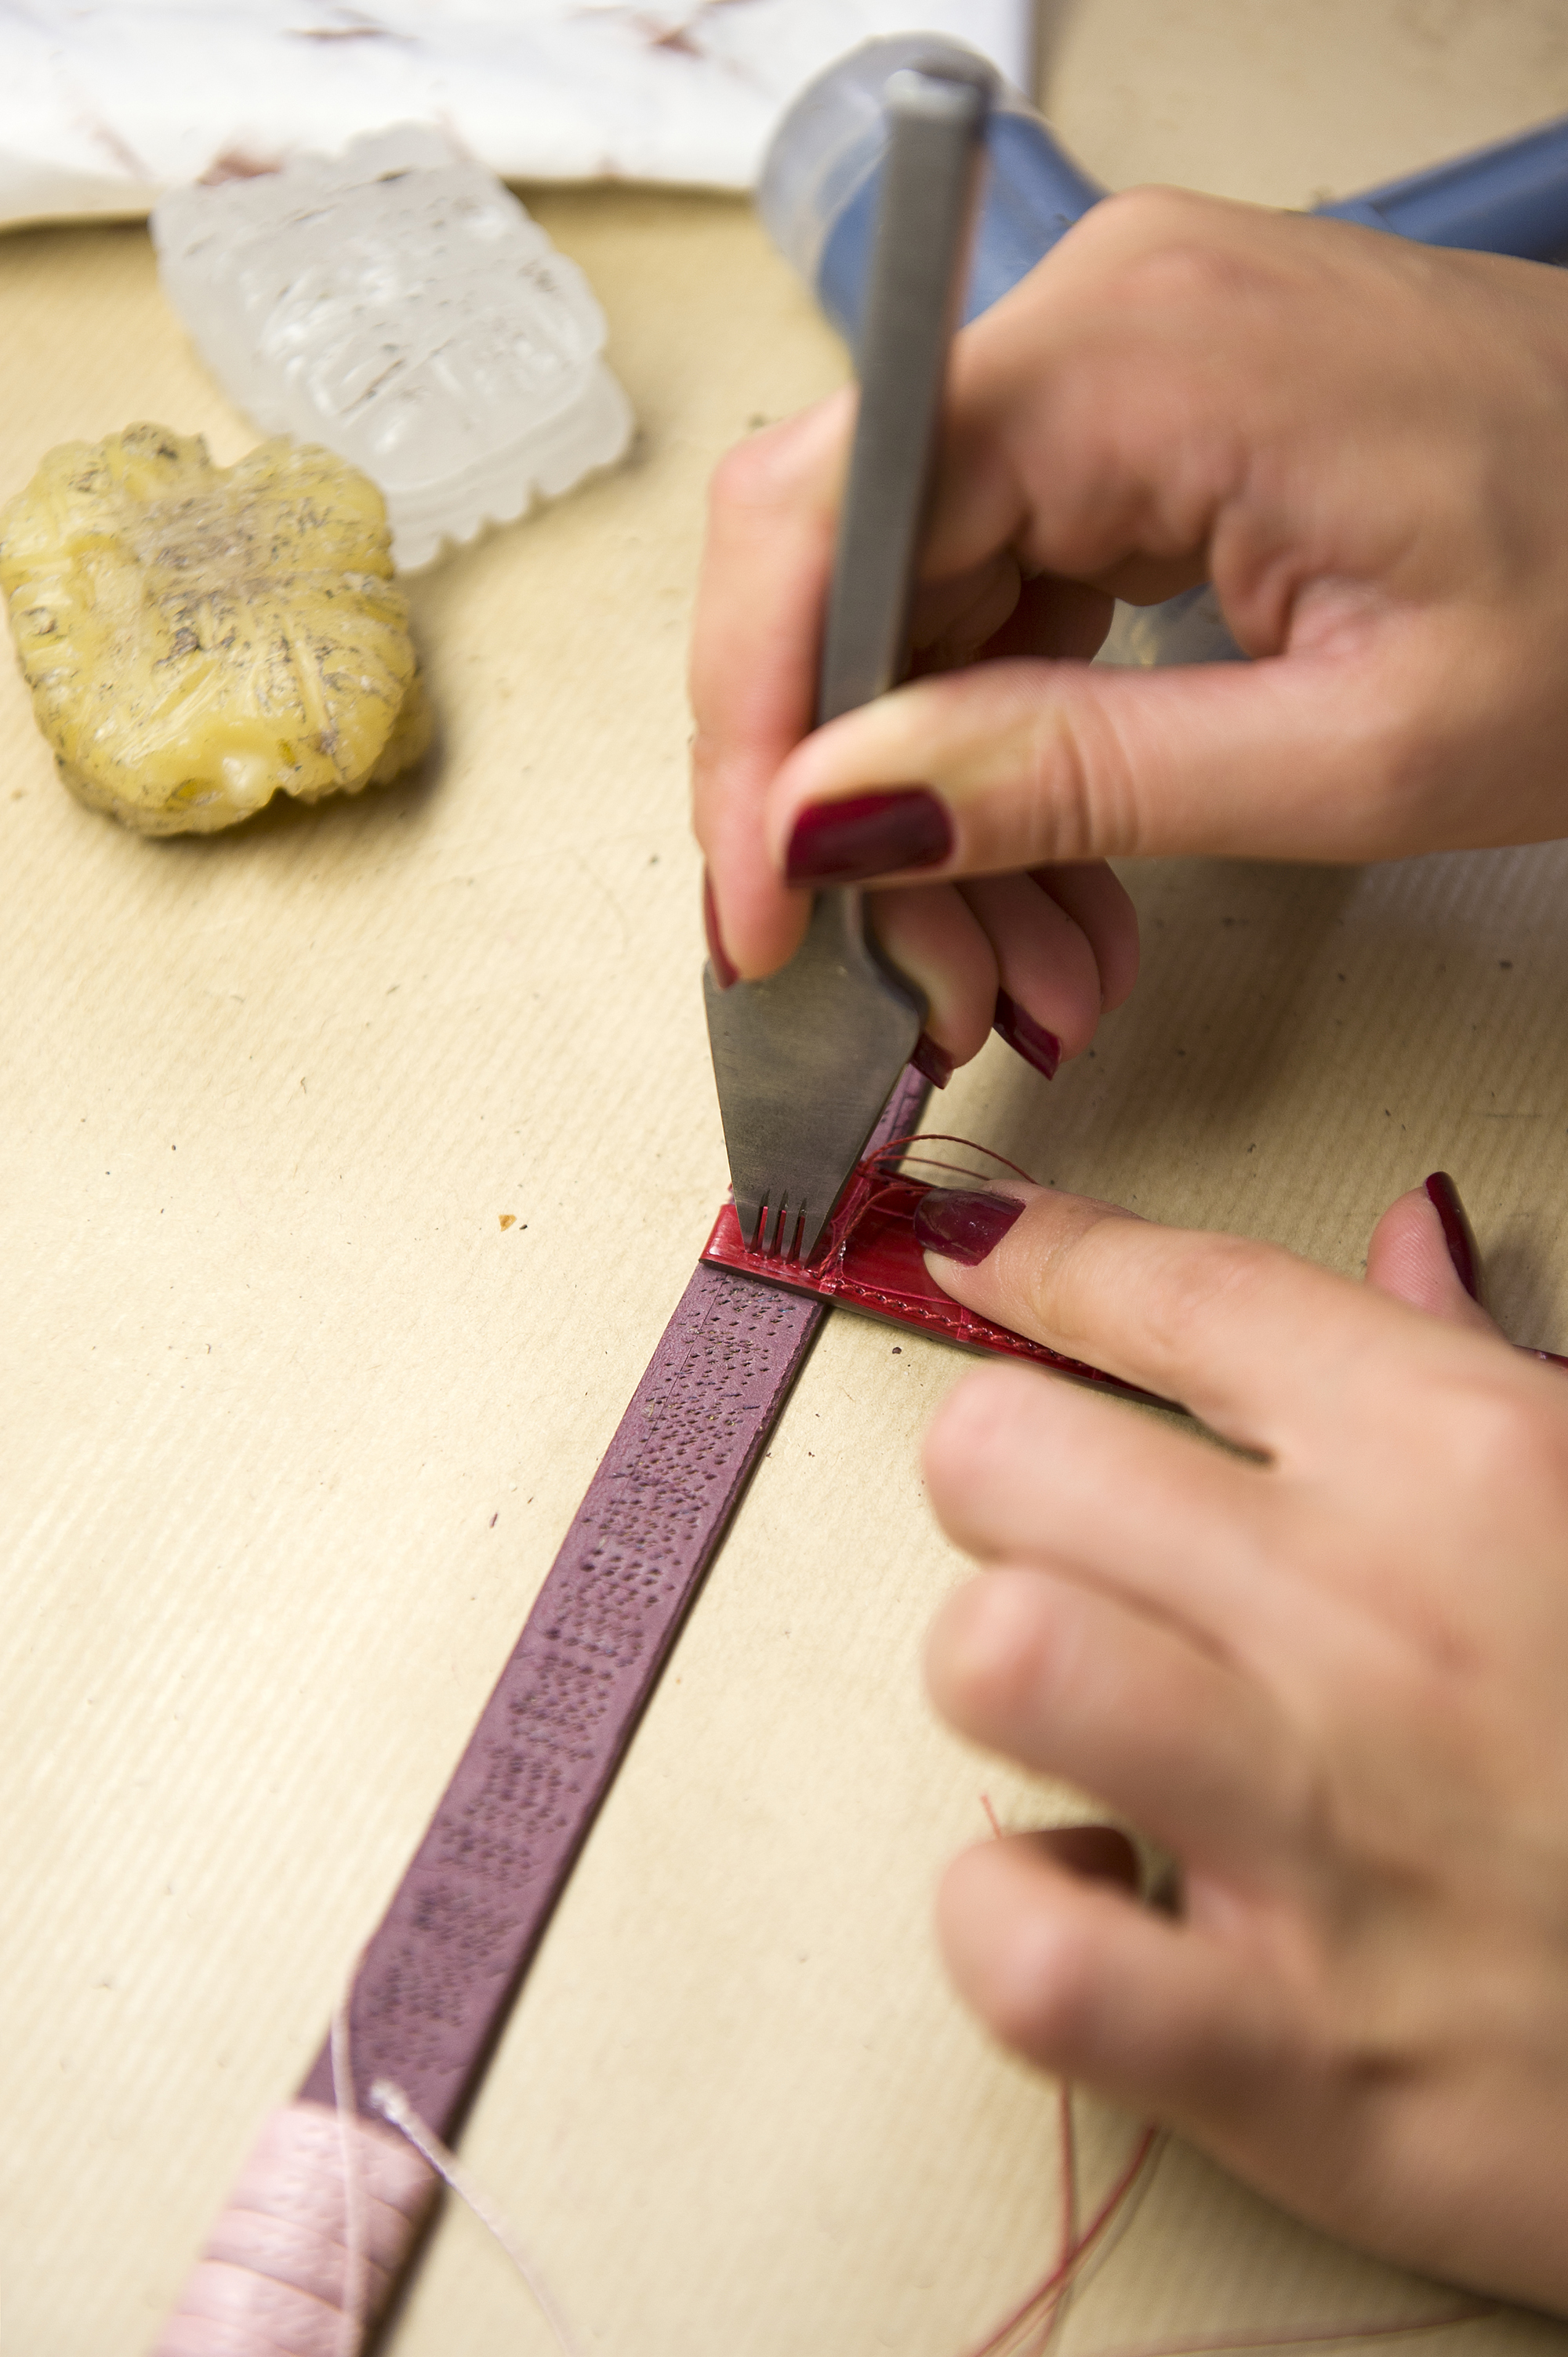 Once the leather is chosen from a delightful array of colours, it is carefully cut and split into three layers. The upper layer is what one sees on the face of the strap, the middle layer is a textile lining and the third layer is what is in contact with the wearer’s wrist. The pre-cut straps are flattened to paper-thickness at their outer edges. A strip of Viledon is placed as a lining between the upper and lower sections of strap, and the whole assembly is glued together. The assembled strap is then sent to the “table workshop” where one artisan hand-stitches, hammers, seals and paints it.